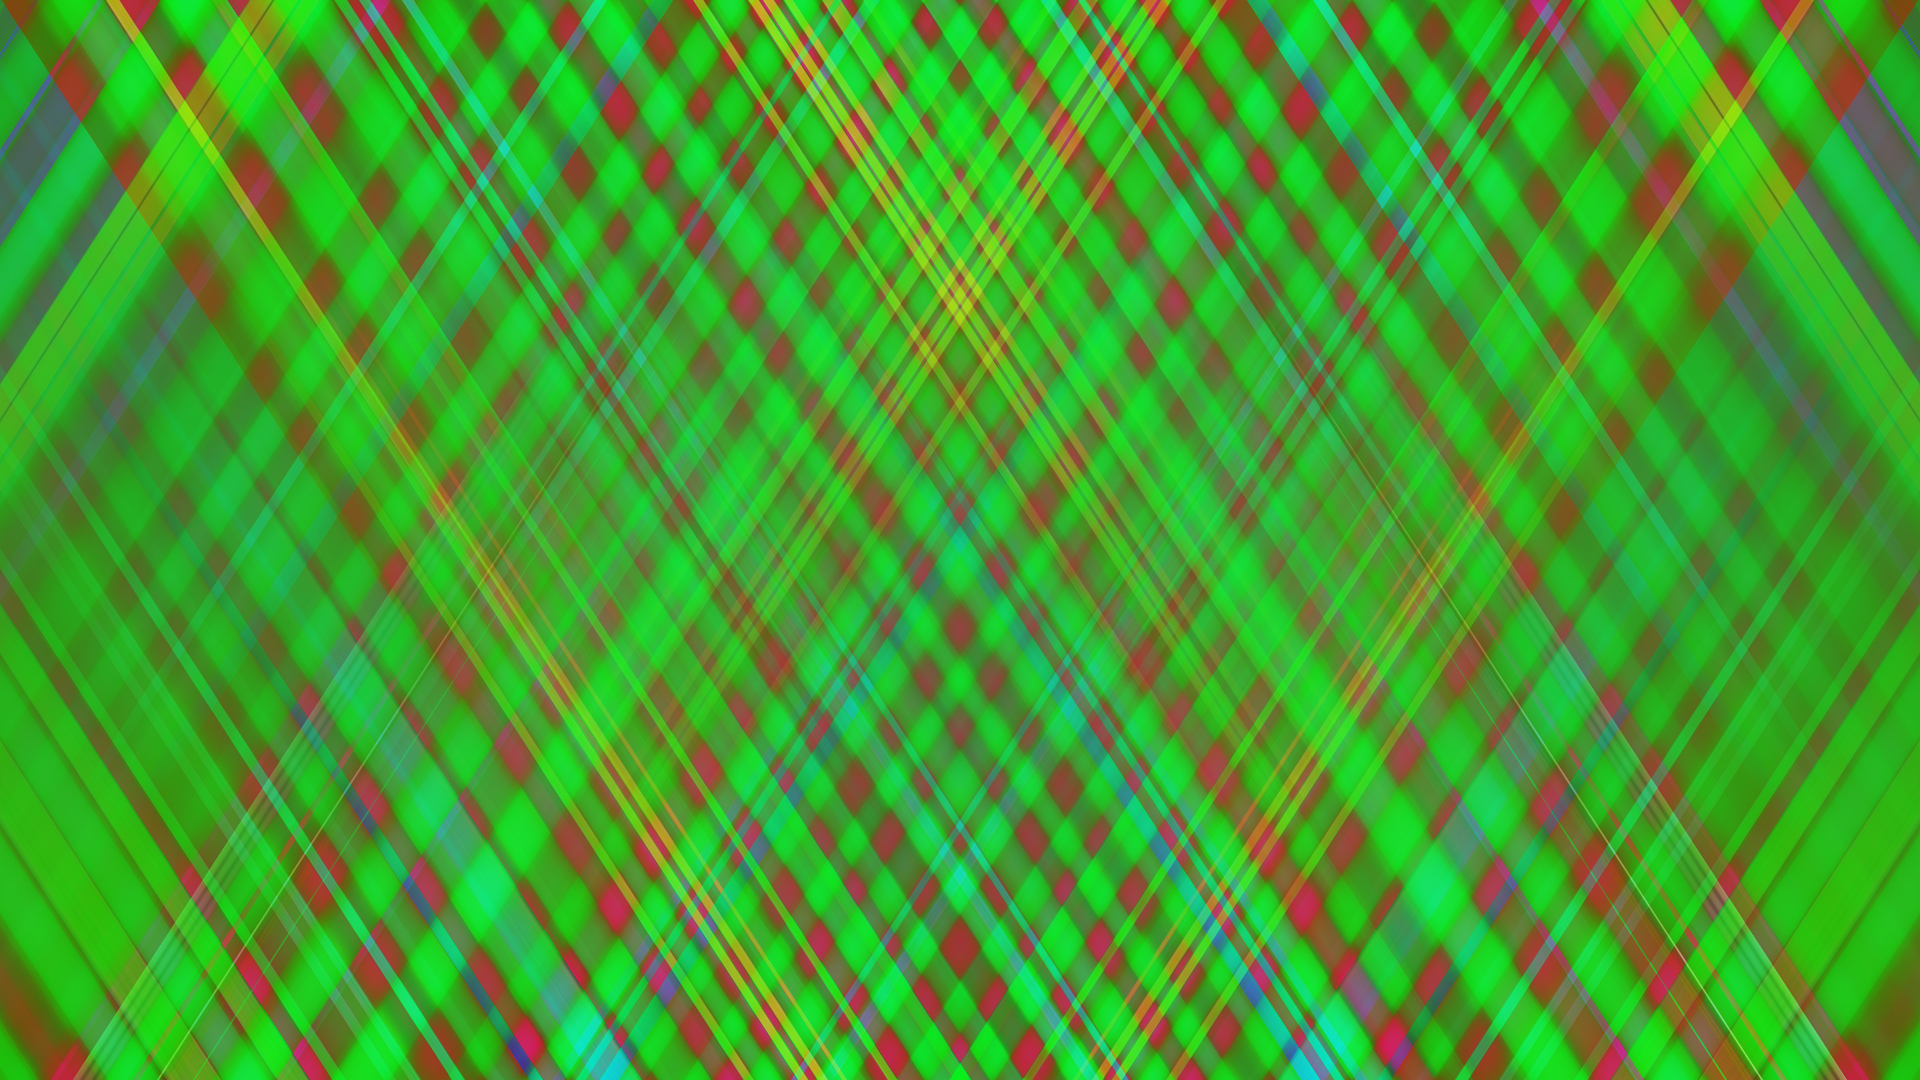 Abstract Colorful Digital Art Geometry Green Lines Plaid Shapes 1920x1080